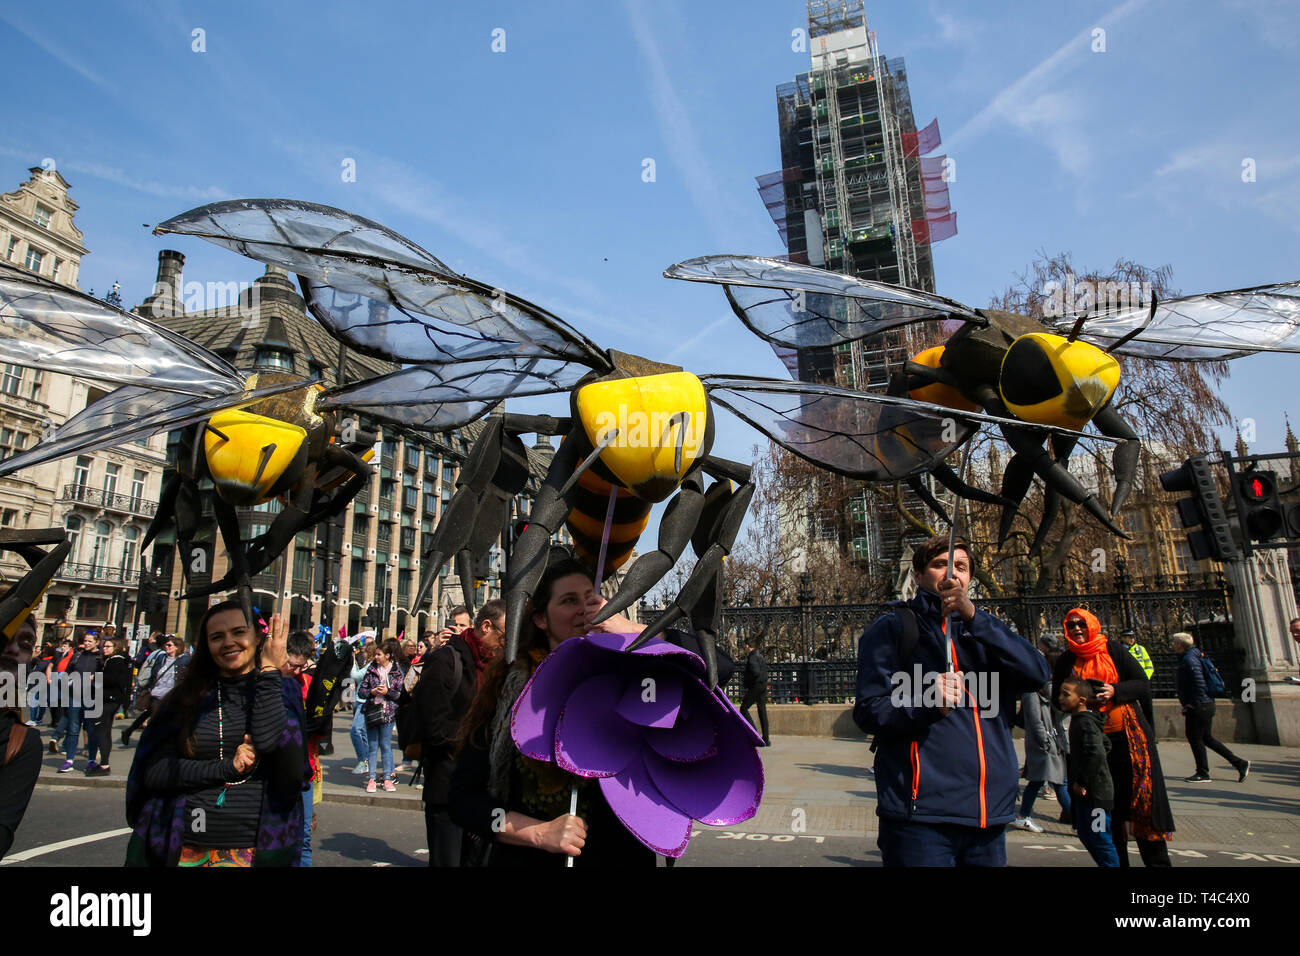 Environmental activists are seen holding large bees during the demonstration. Activist protest at the Parliament Square demanding for urgent Government action on climate change, the protest was organised by Extinction Rebellion. Stock Photo